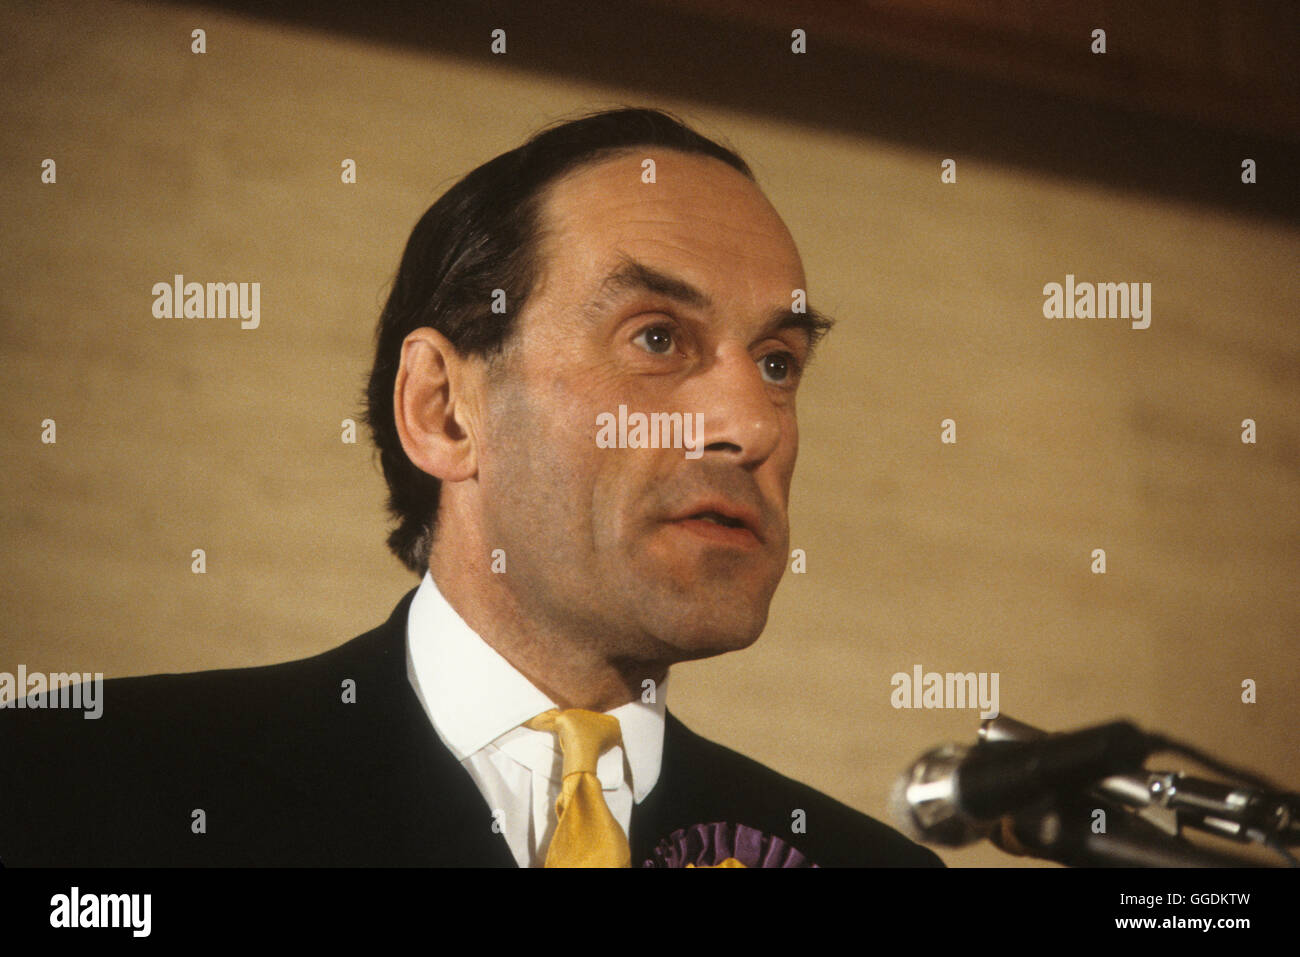 Jeremy Thorpe 1979. 'Thorpe Works For Us'  at his adoption meeting for his North Devon constituency Barnstable 1970s HOMER SYKES Stock Photo